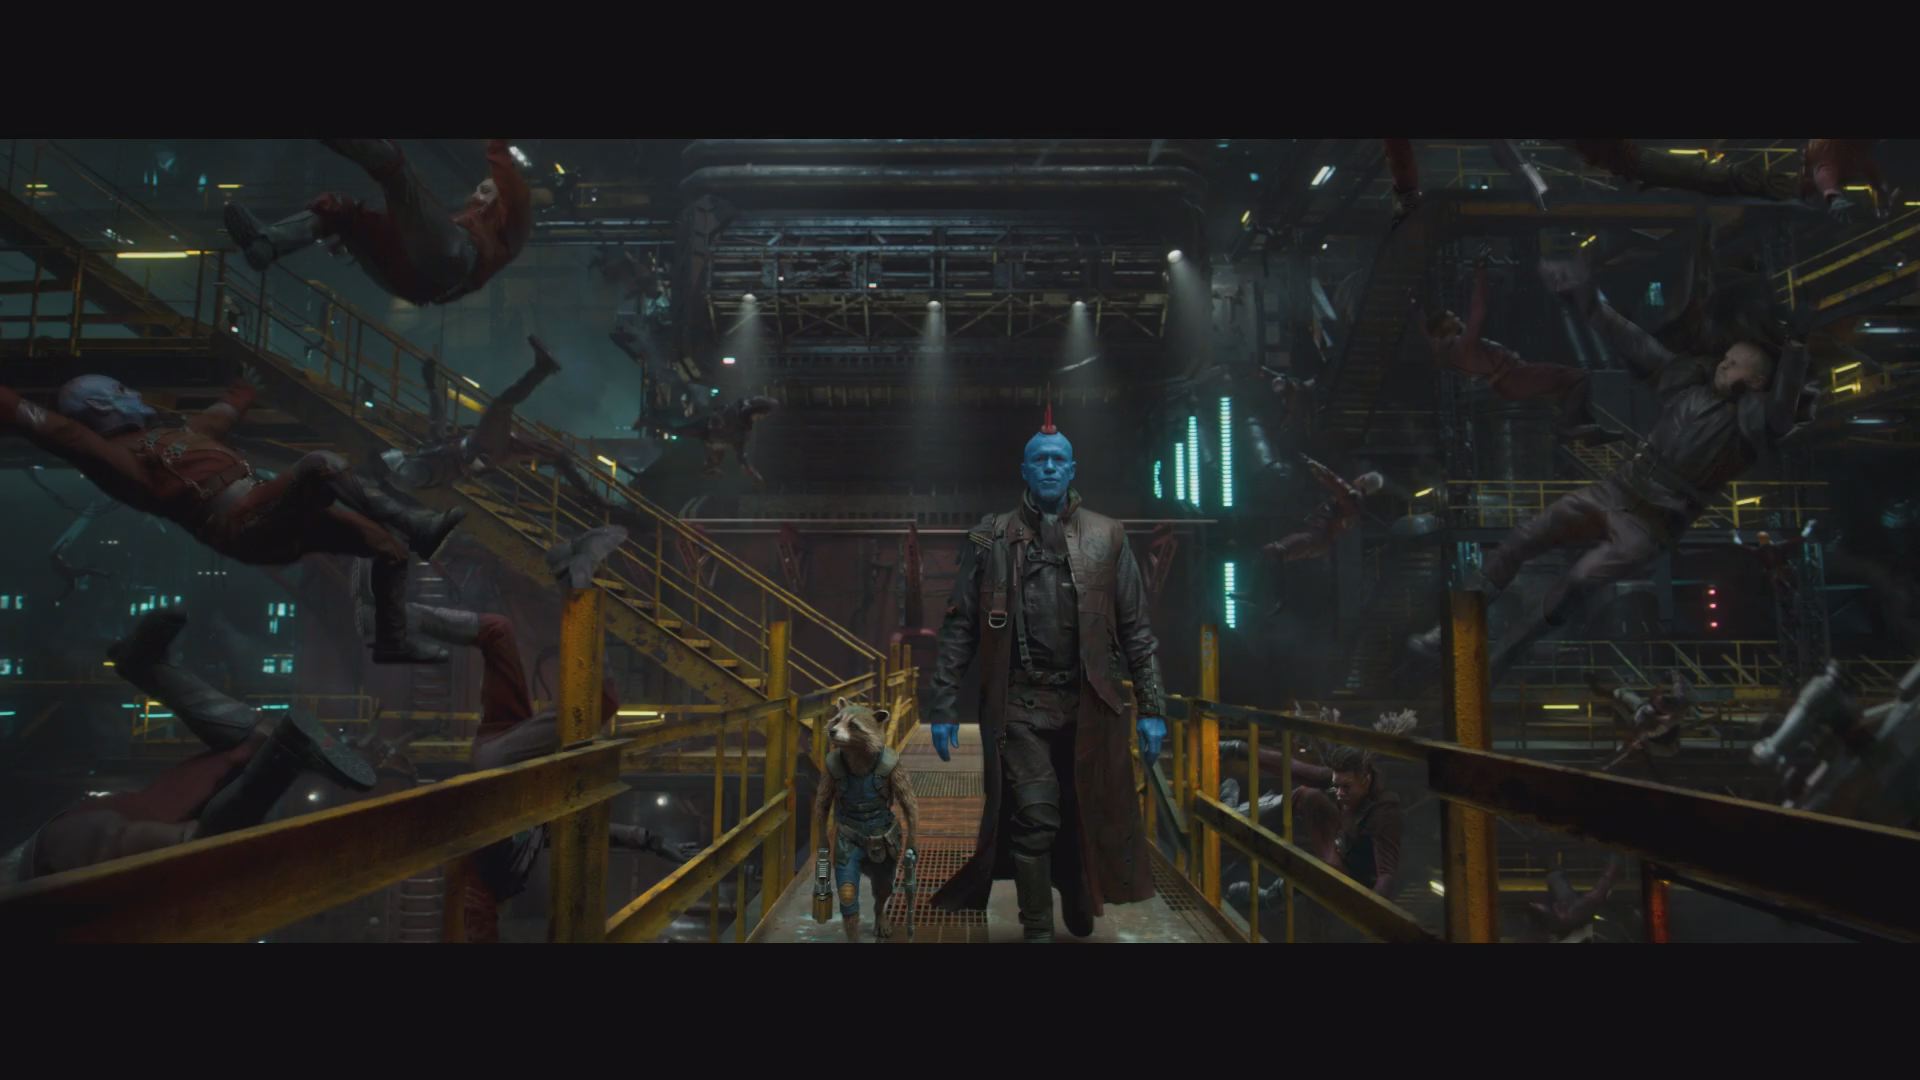 5 Things To Love About the New Guardians Teaser Trailer